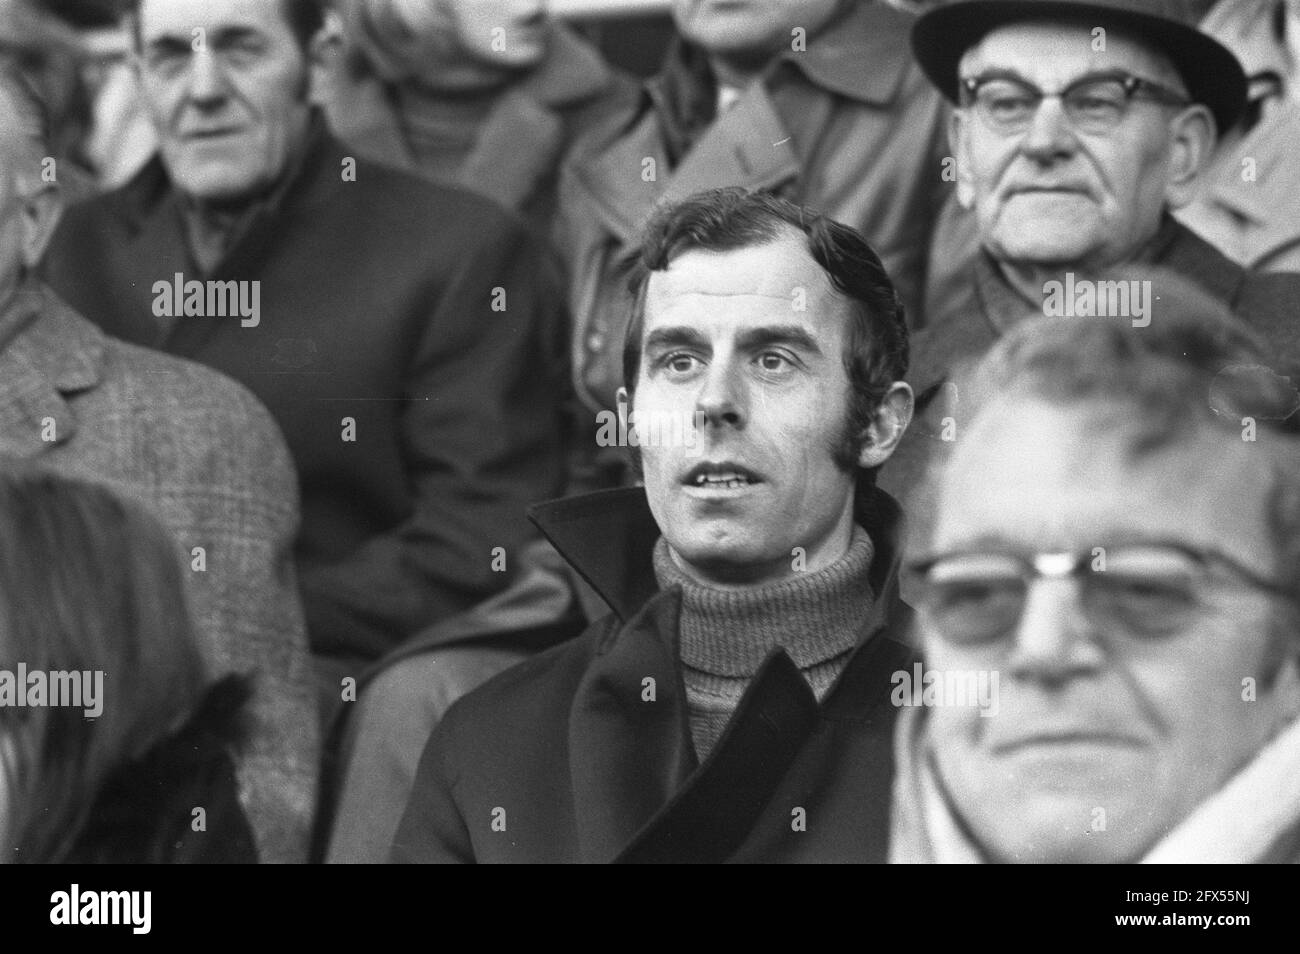 Feyenoord v NEC 5-1, Coen Moulijn in the stands, 16 January 1972, sports, soccer, The Netherlands, 20th century press agency photo, news to remember, documentary, historic photography 1945-1990, visual stories, human history of the Twentieth Century, capturing moments in time Stock Photo